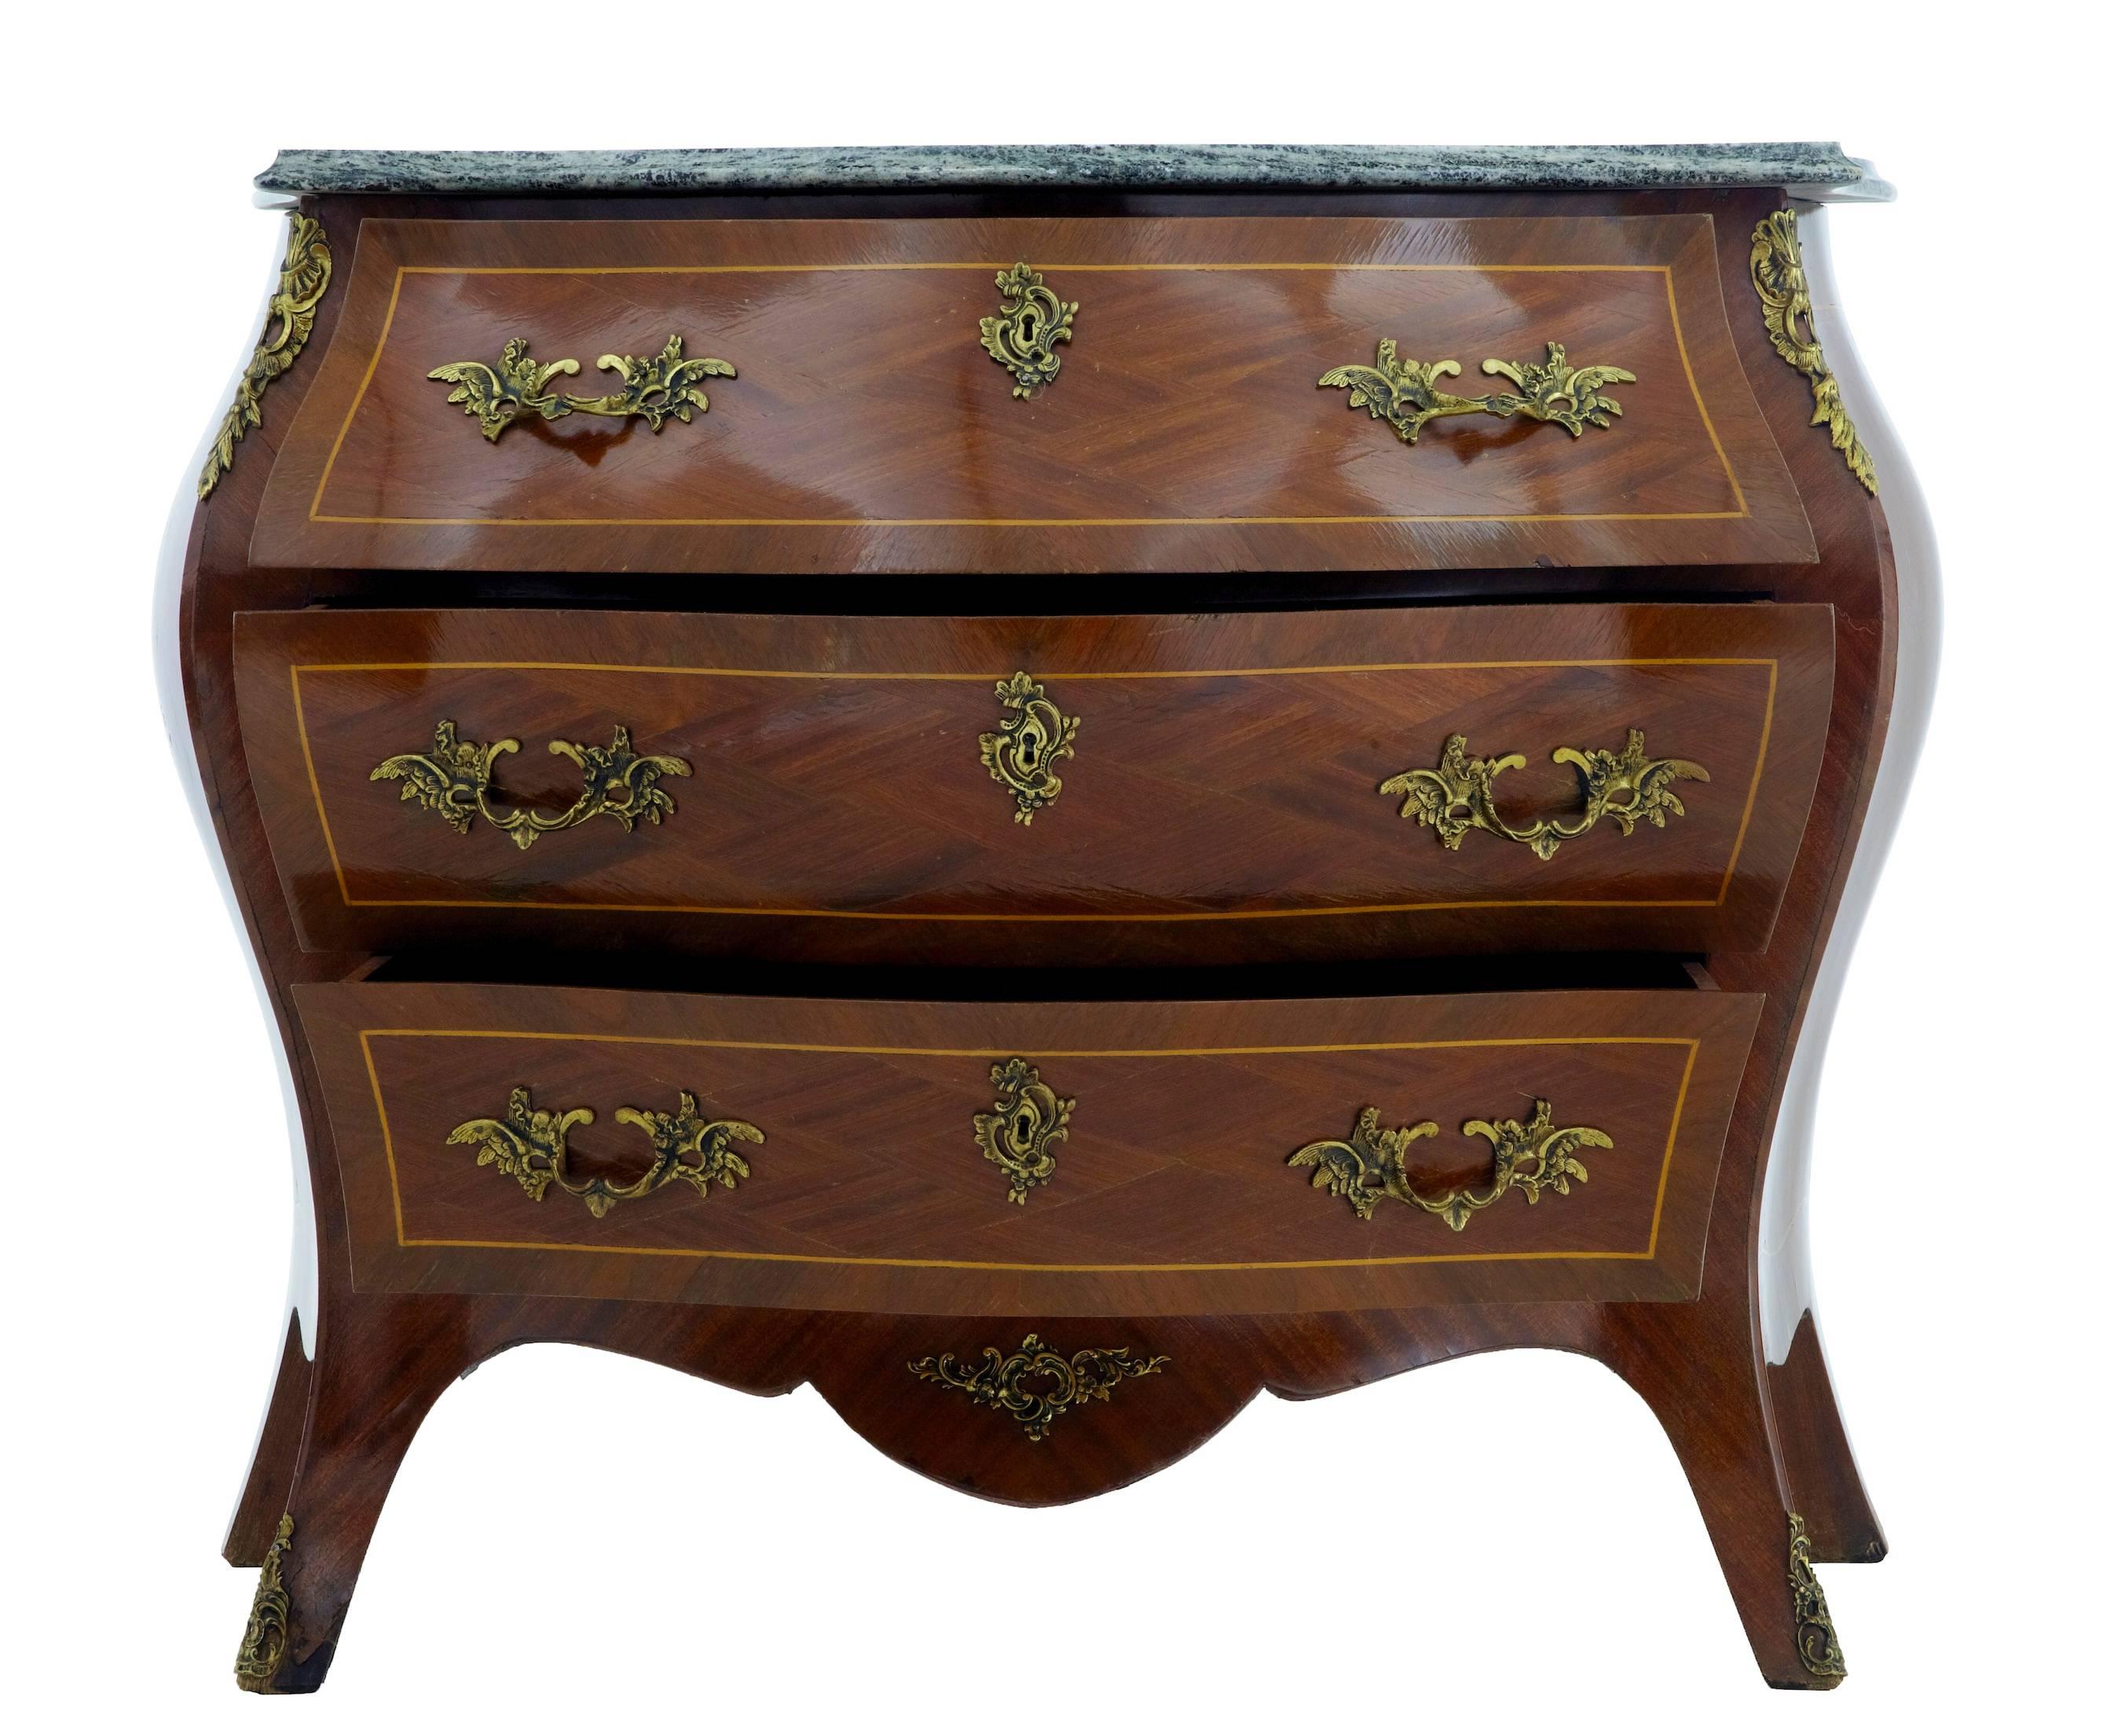 Good quality bombe shape commode, circa 1950.
Three drawers with ornate handles.
Inlaid and crossbanded with kingwood and mahogany, strung with satinwood.
Marble-top.
Some veneer losses to feet and marks to side.

Measures: Height: 31